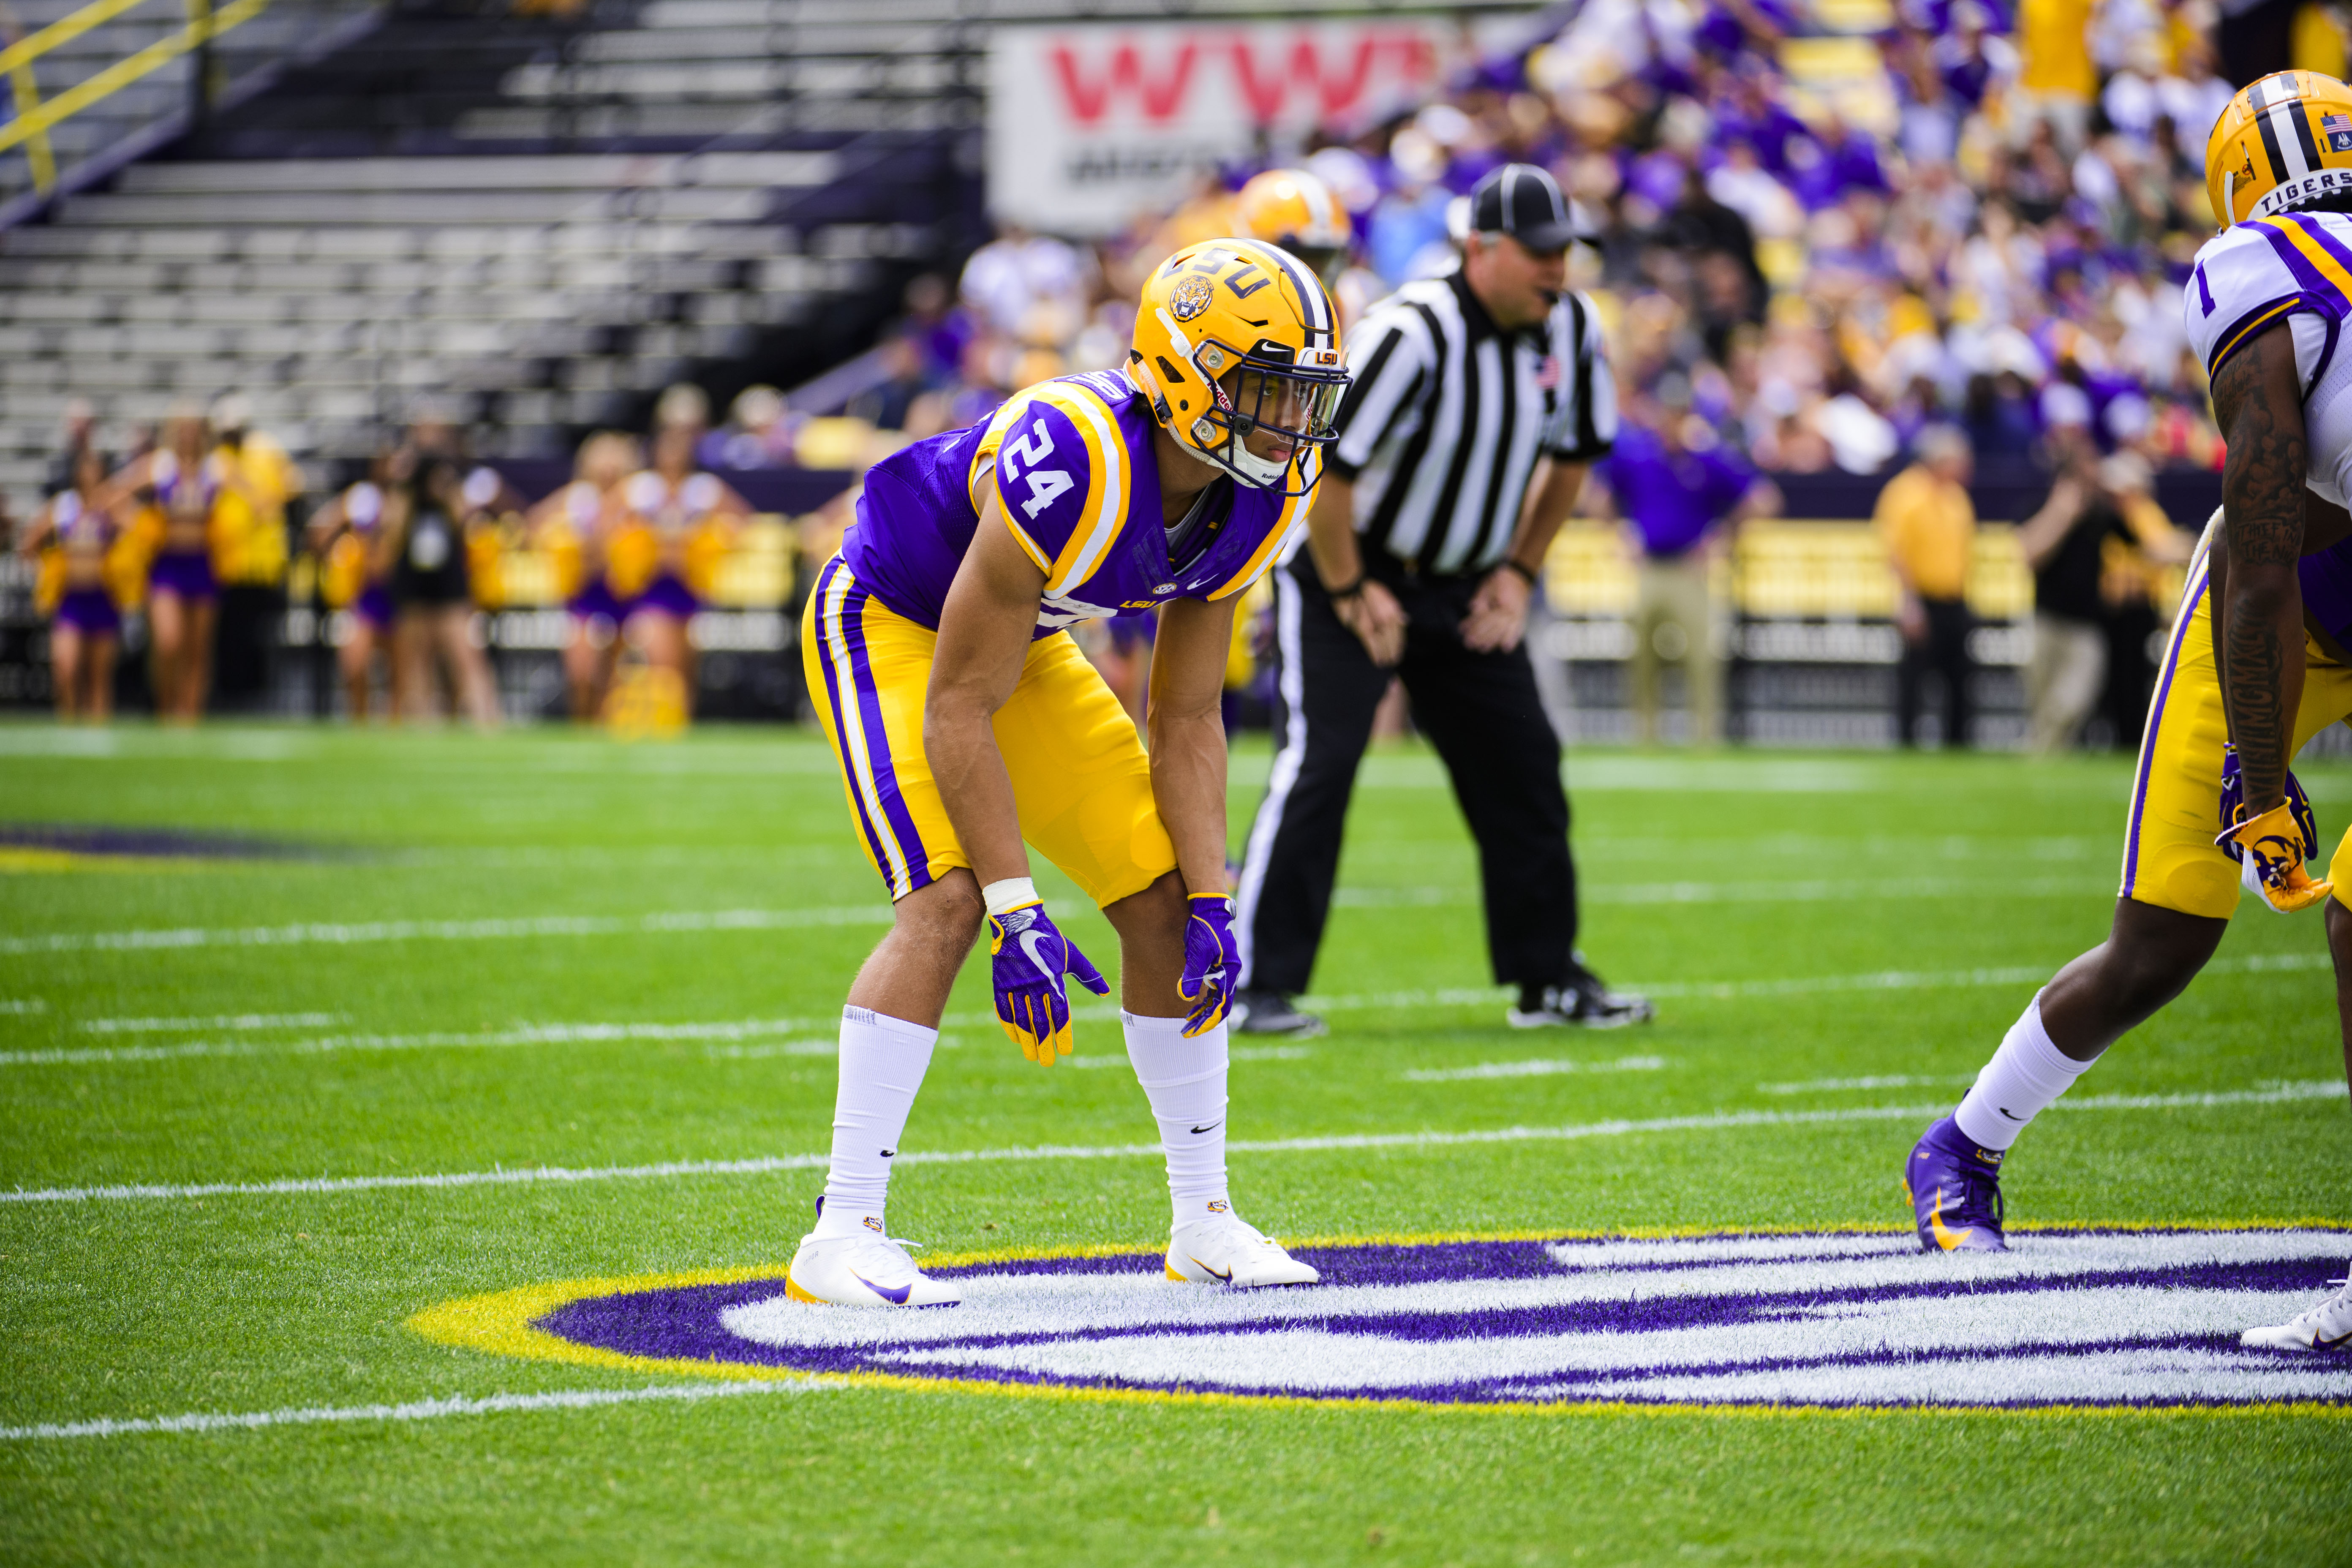 Derek Stingley Jr. is 'very questionable' to play as LSU opens SEC play  against Mississippi State